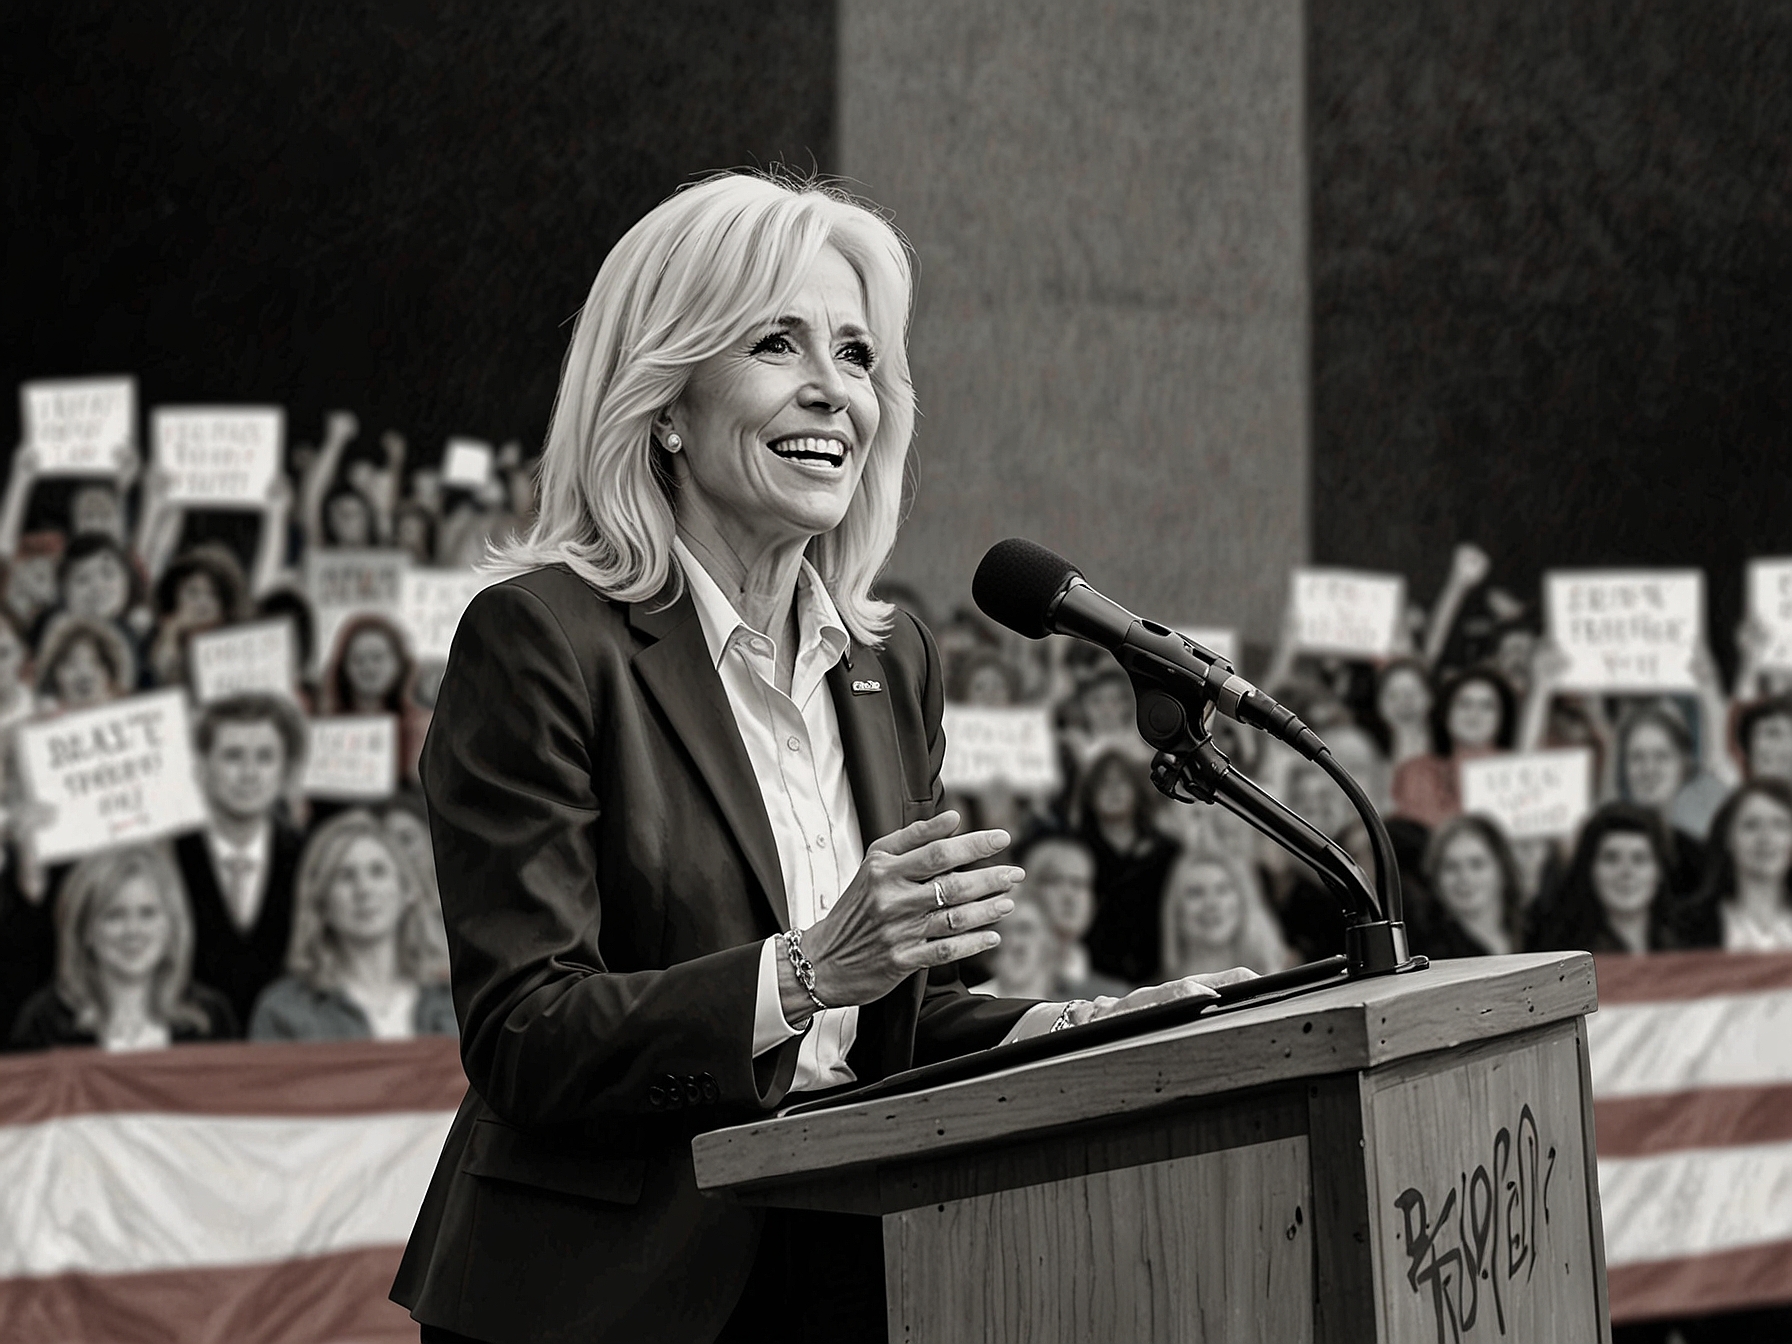 A young woman standing beside First Lady Jill Biden at a campaign rally in Pennsylvania, both passionately addressing an audience about the importance of safeguarding reproductive rights.